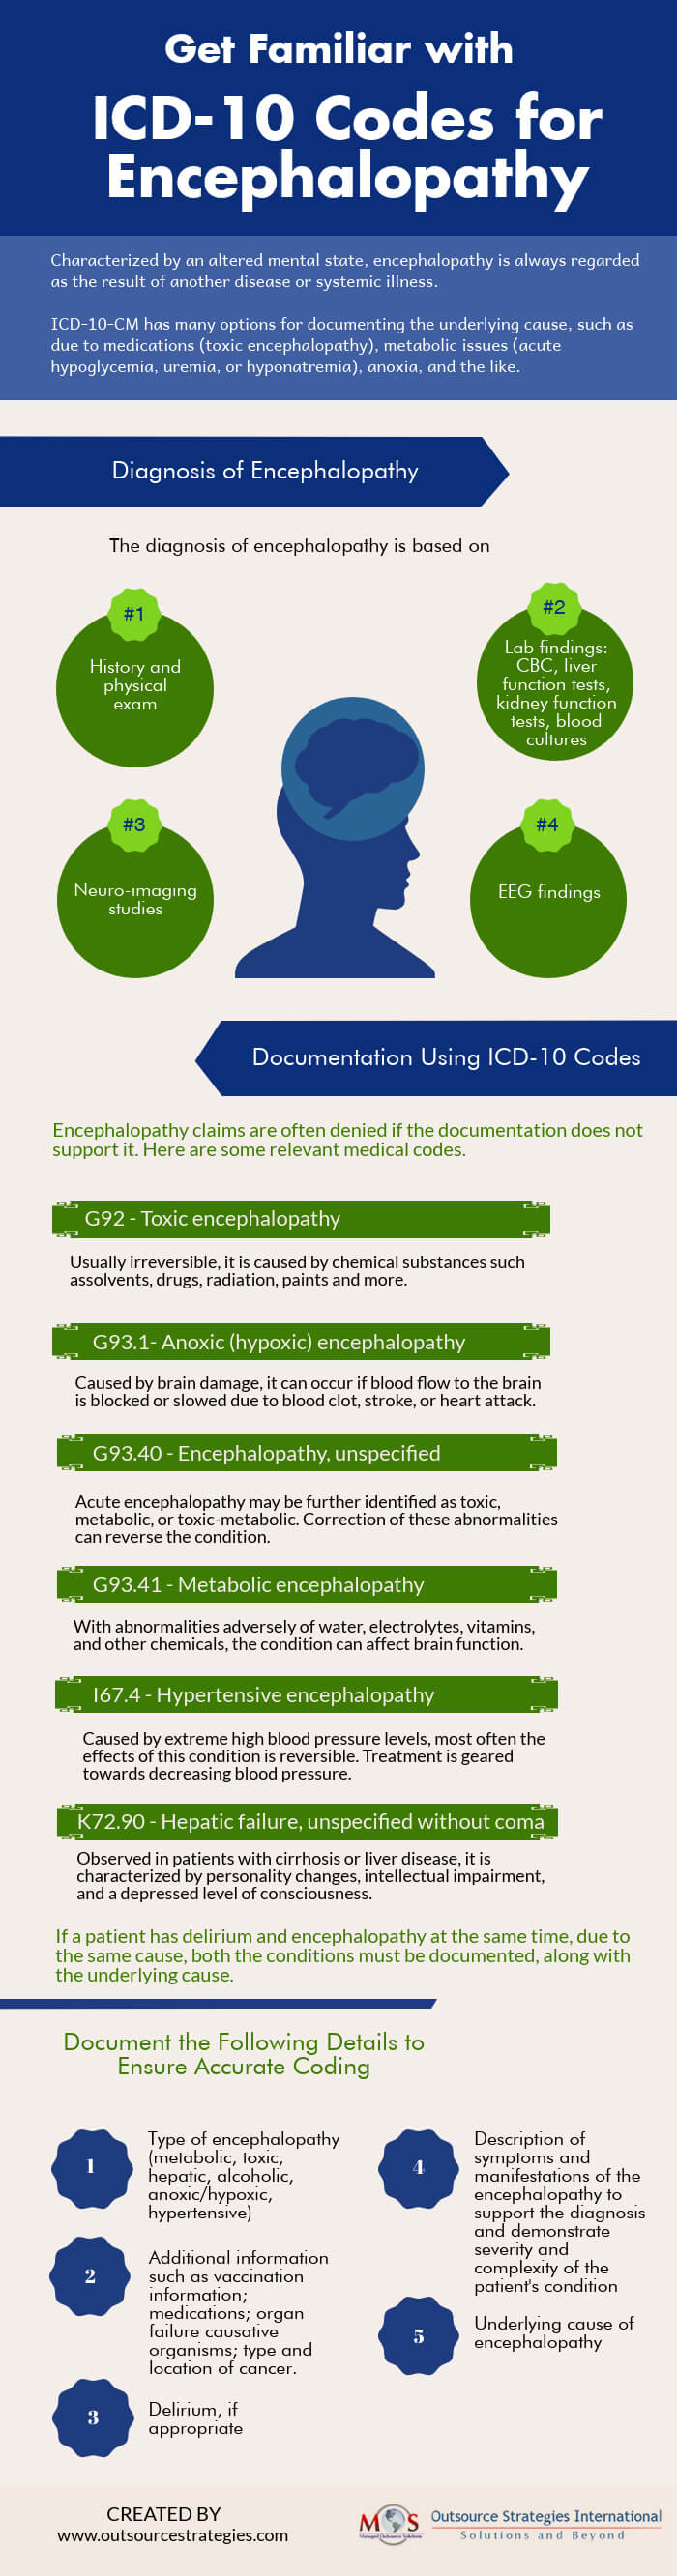 Get Familiar with ICD-10 Codes for Encephalopathy